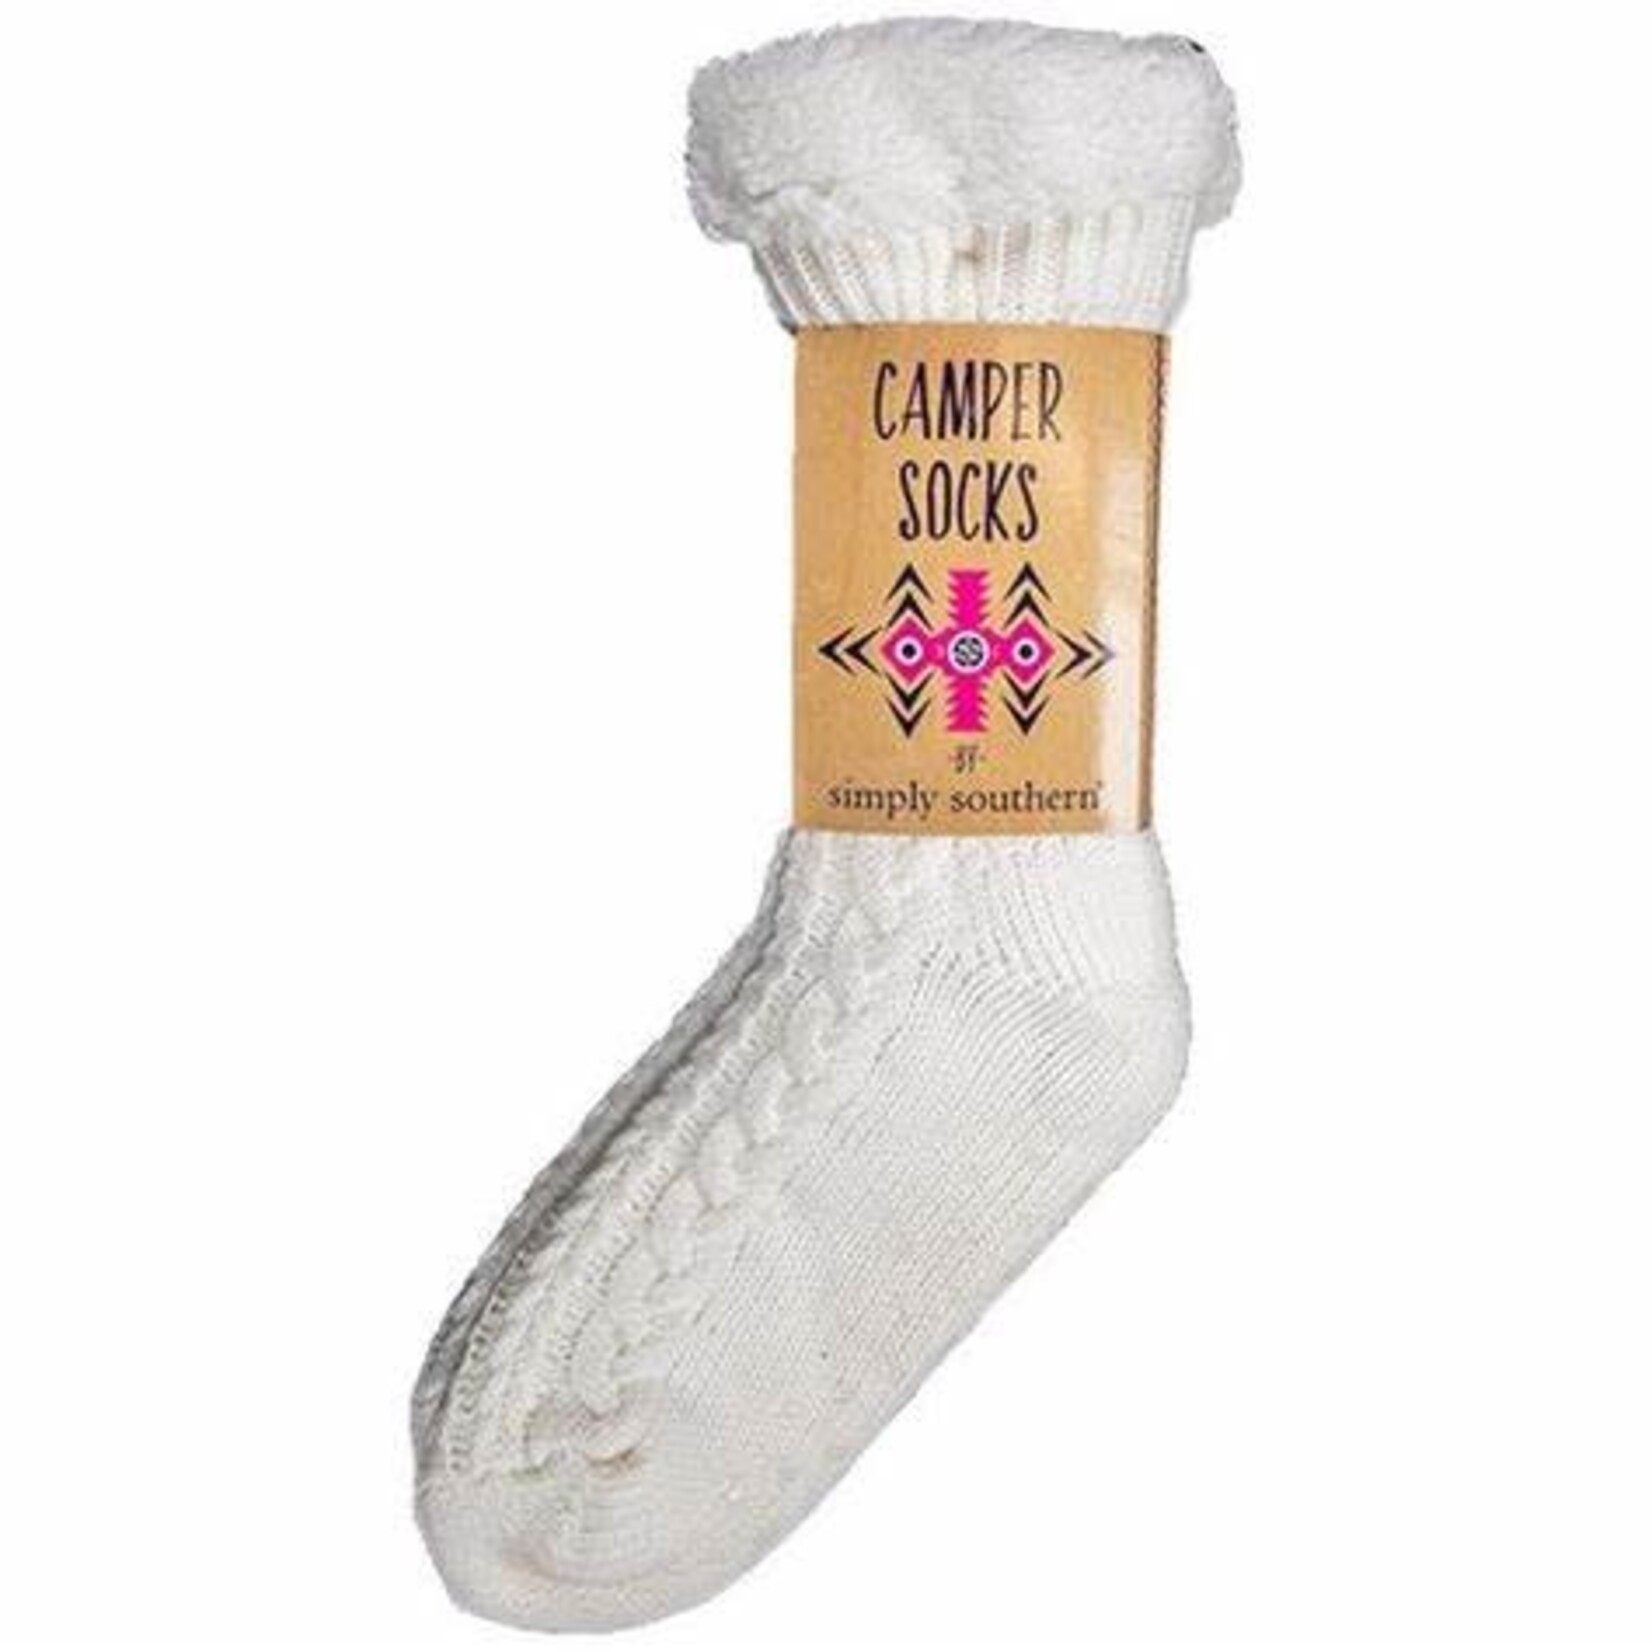 Simply Southern Simply Southern Camper Socks Solid